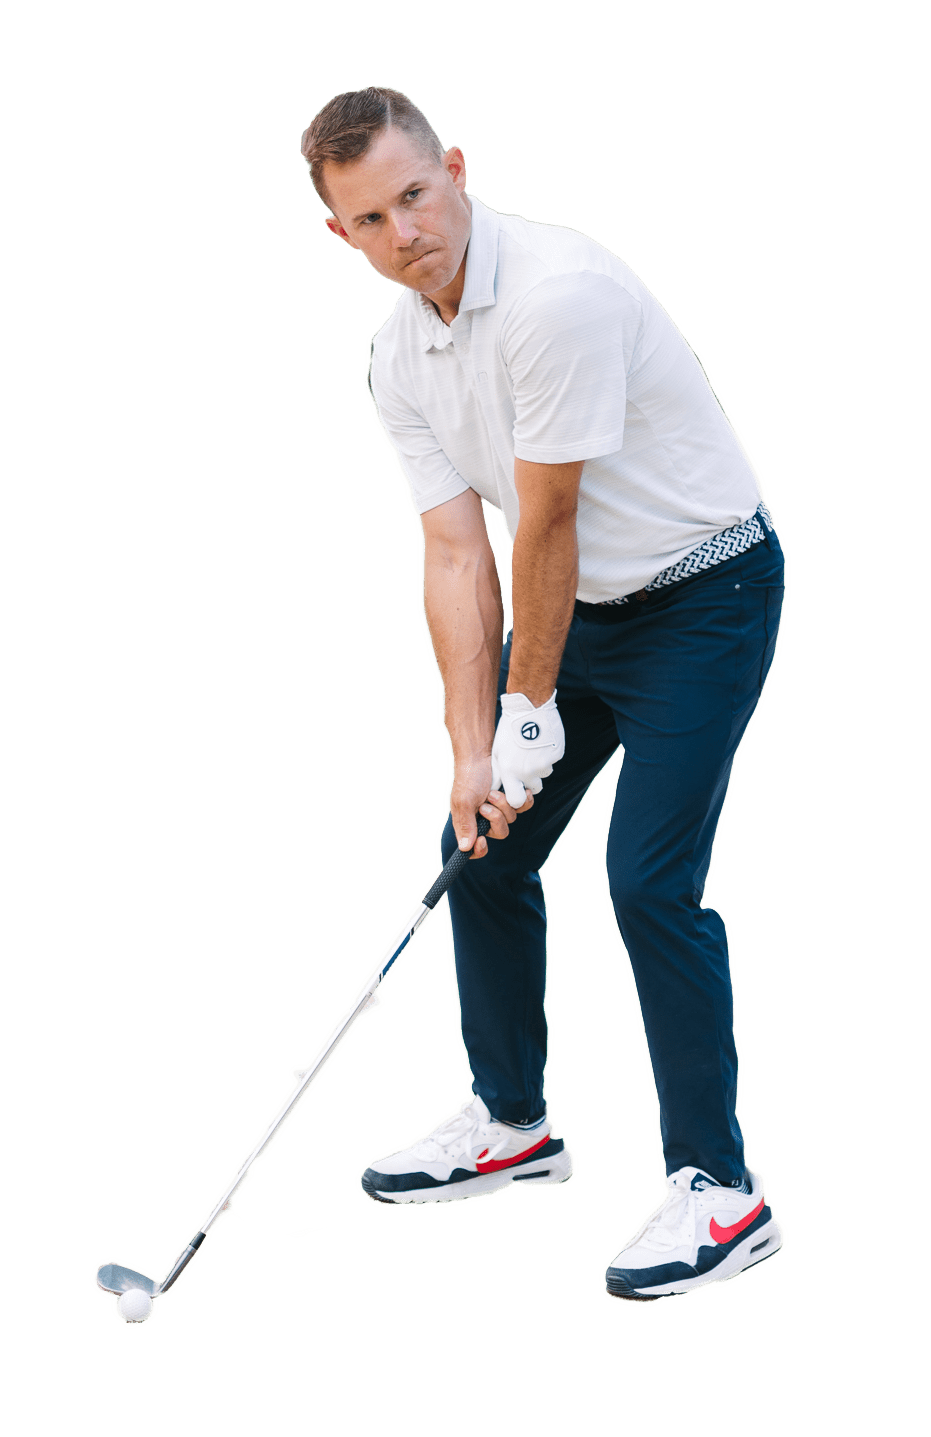 man about to swing golf club